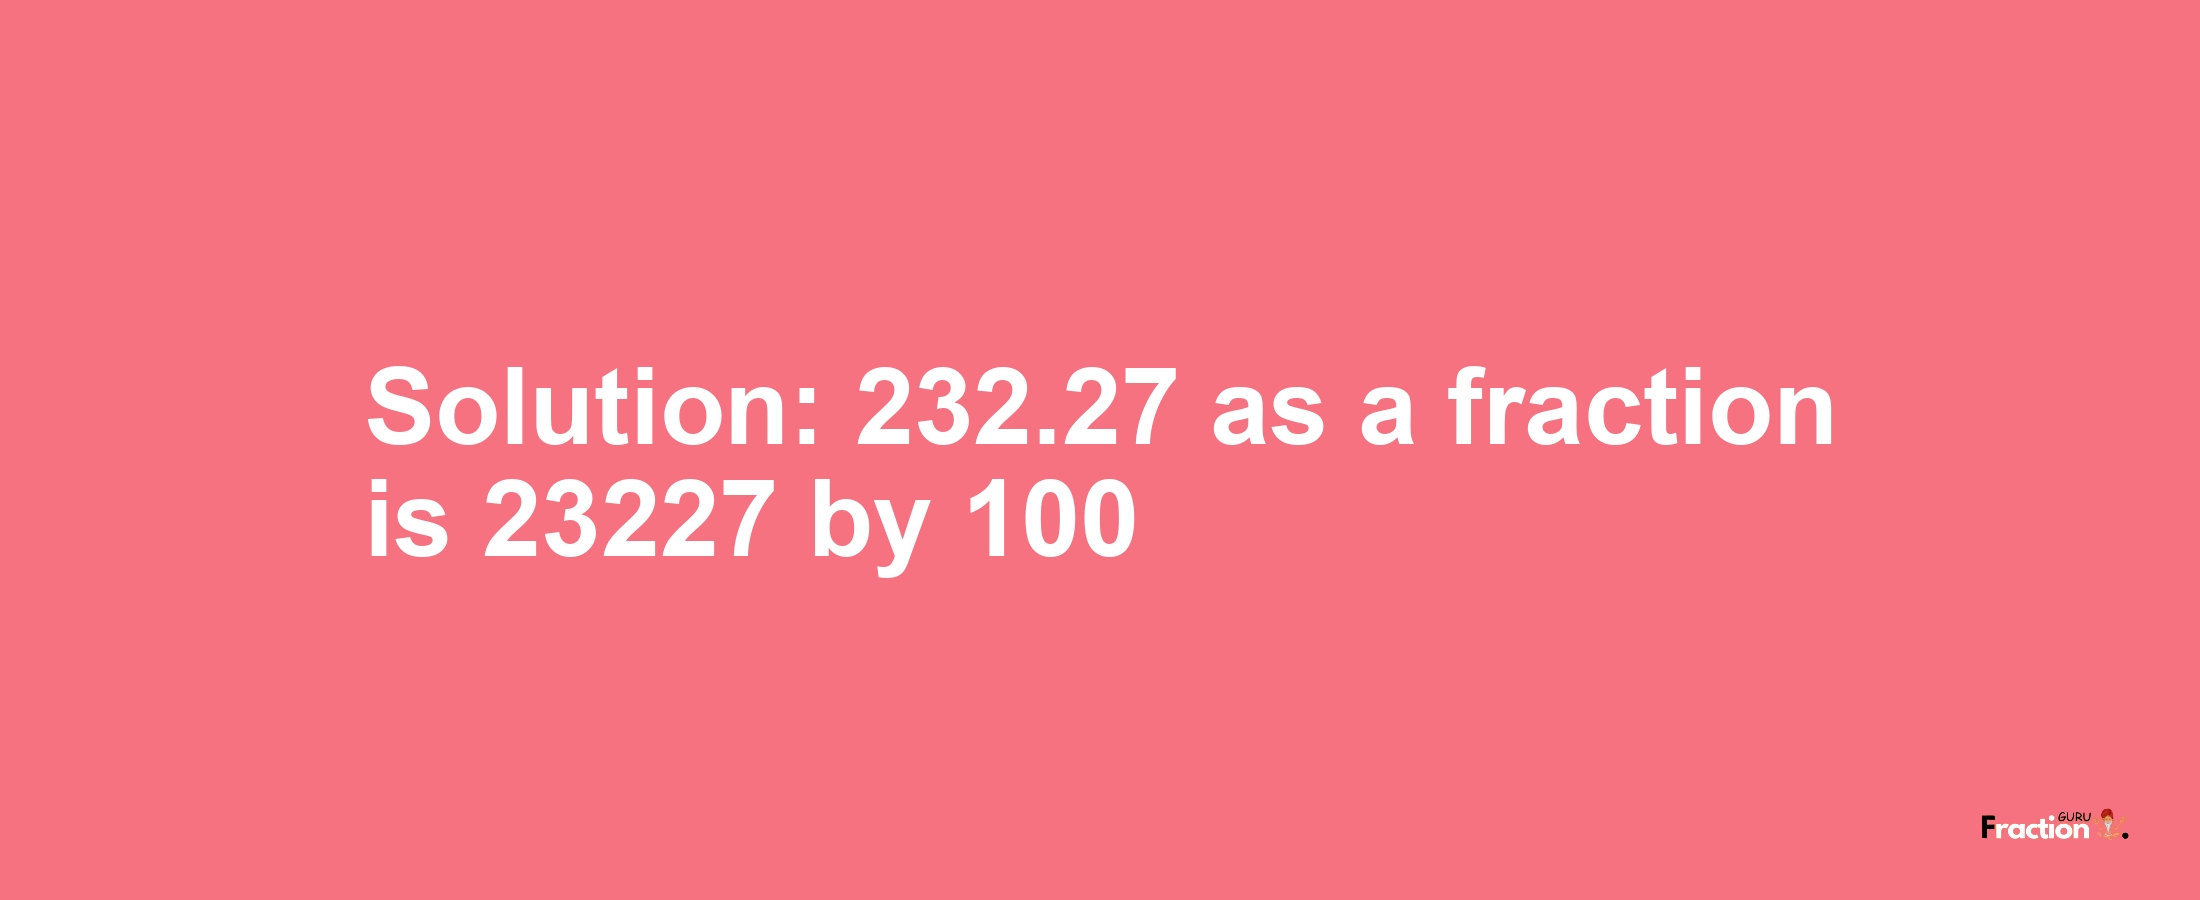 Solution:232.27 as a fraction is 23227/100